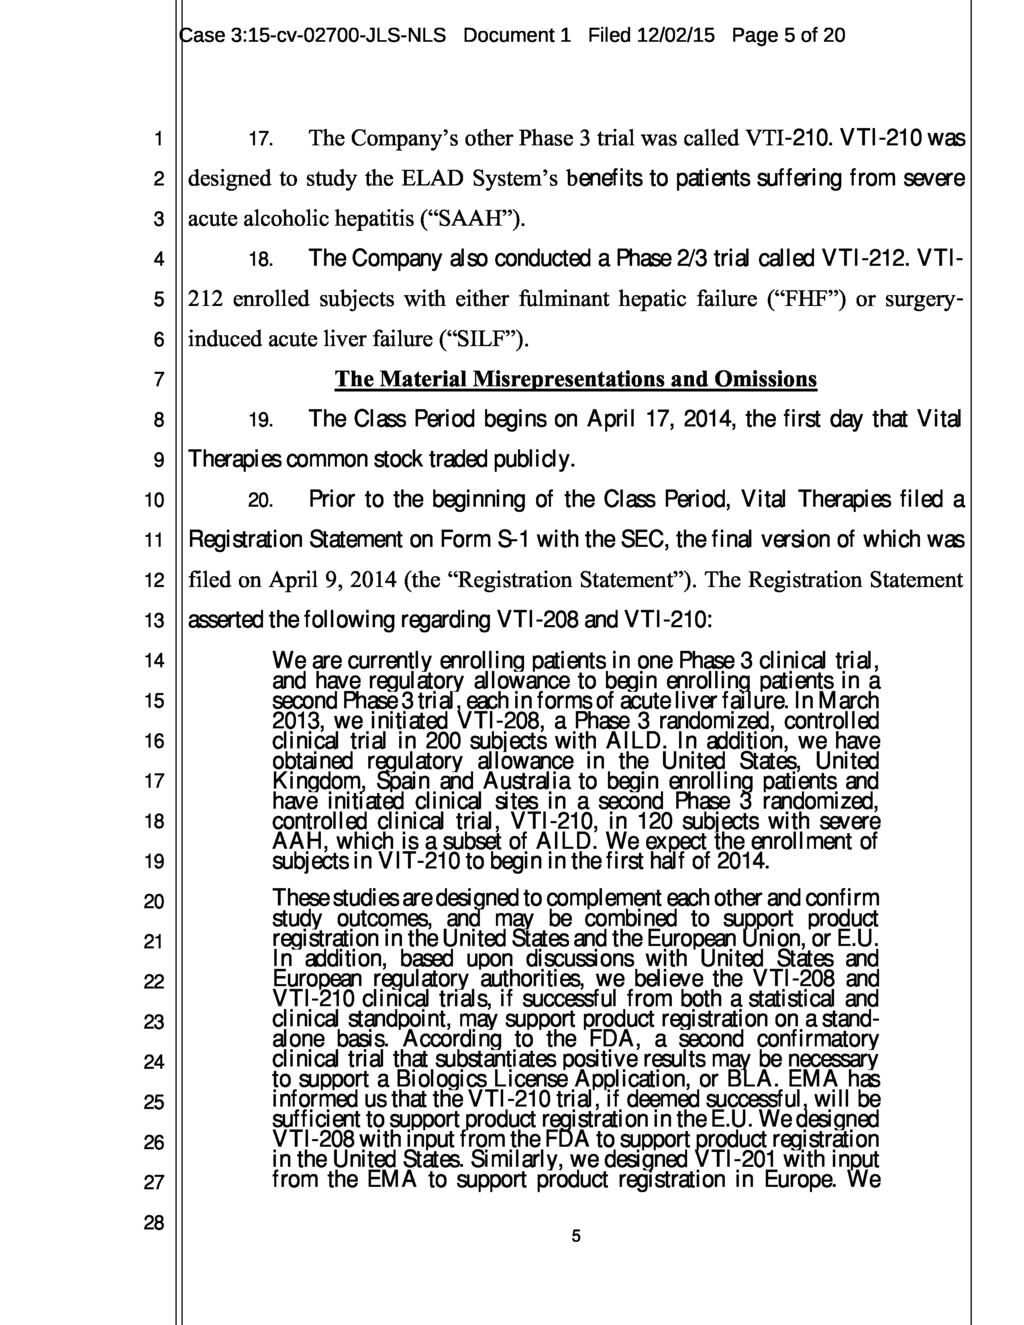 3:15-cv-000-JLS-NLS Document 1 Filed 12/02/15 Page 5 of 20 1 2 3 4 5 6 7 8 9 10 11 12 13 14 15 16 17 18 19 20 21 22 23 17. The Company s other Phase 3 trial was called VTI-210.